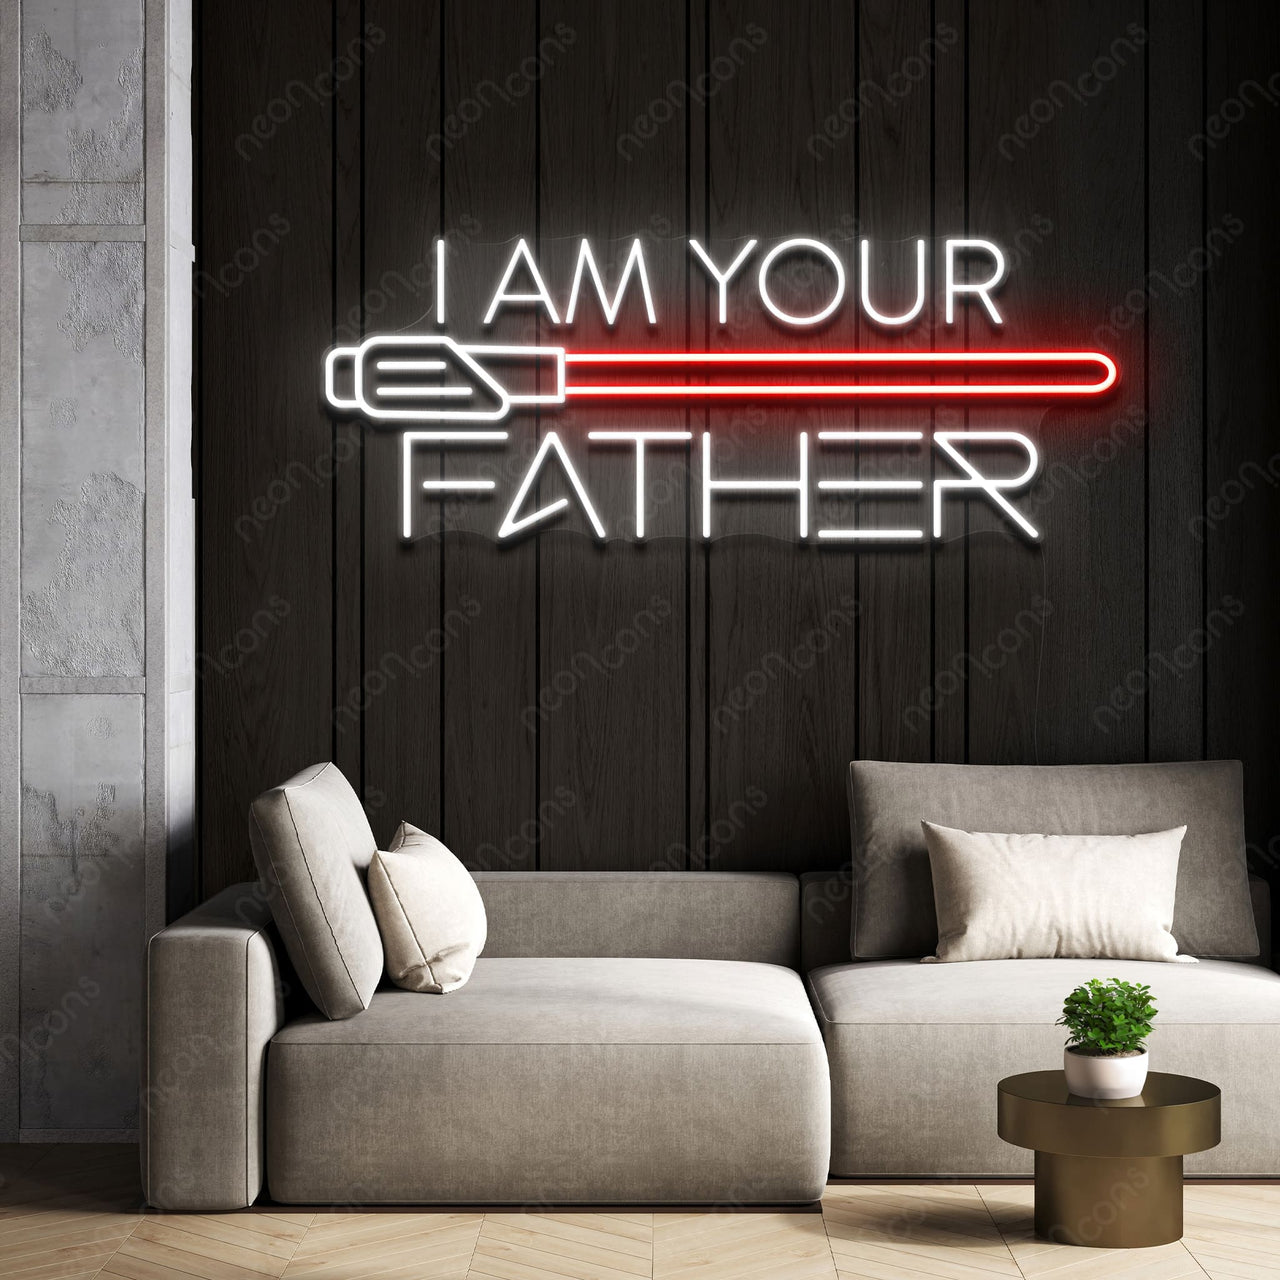 "I Am Your Father" Neon Sign by Neon Icons